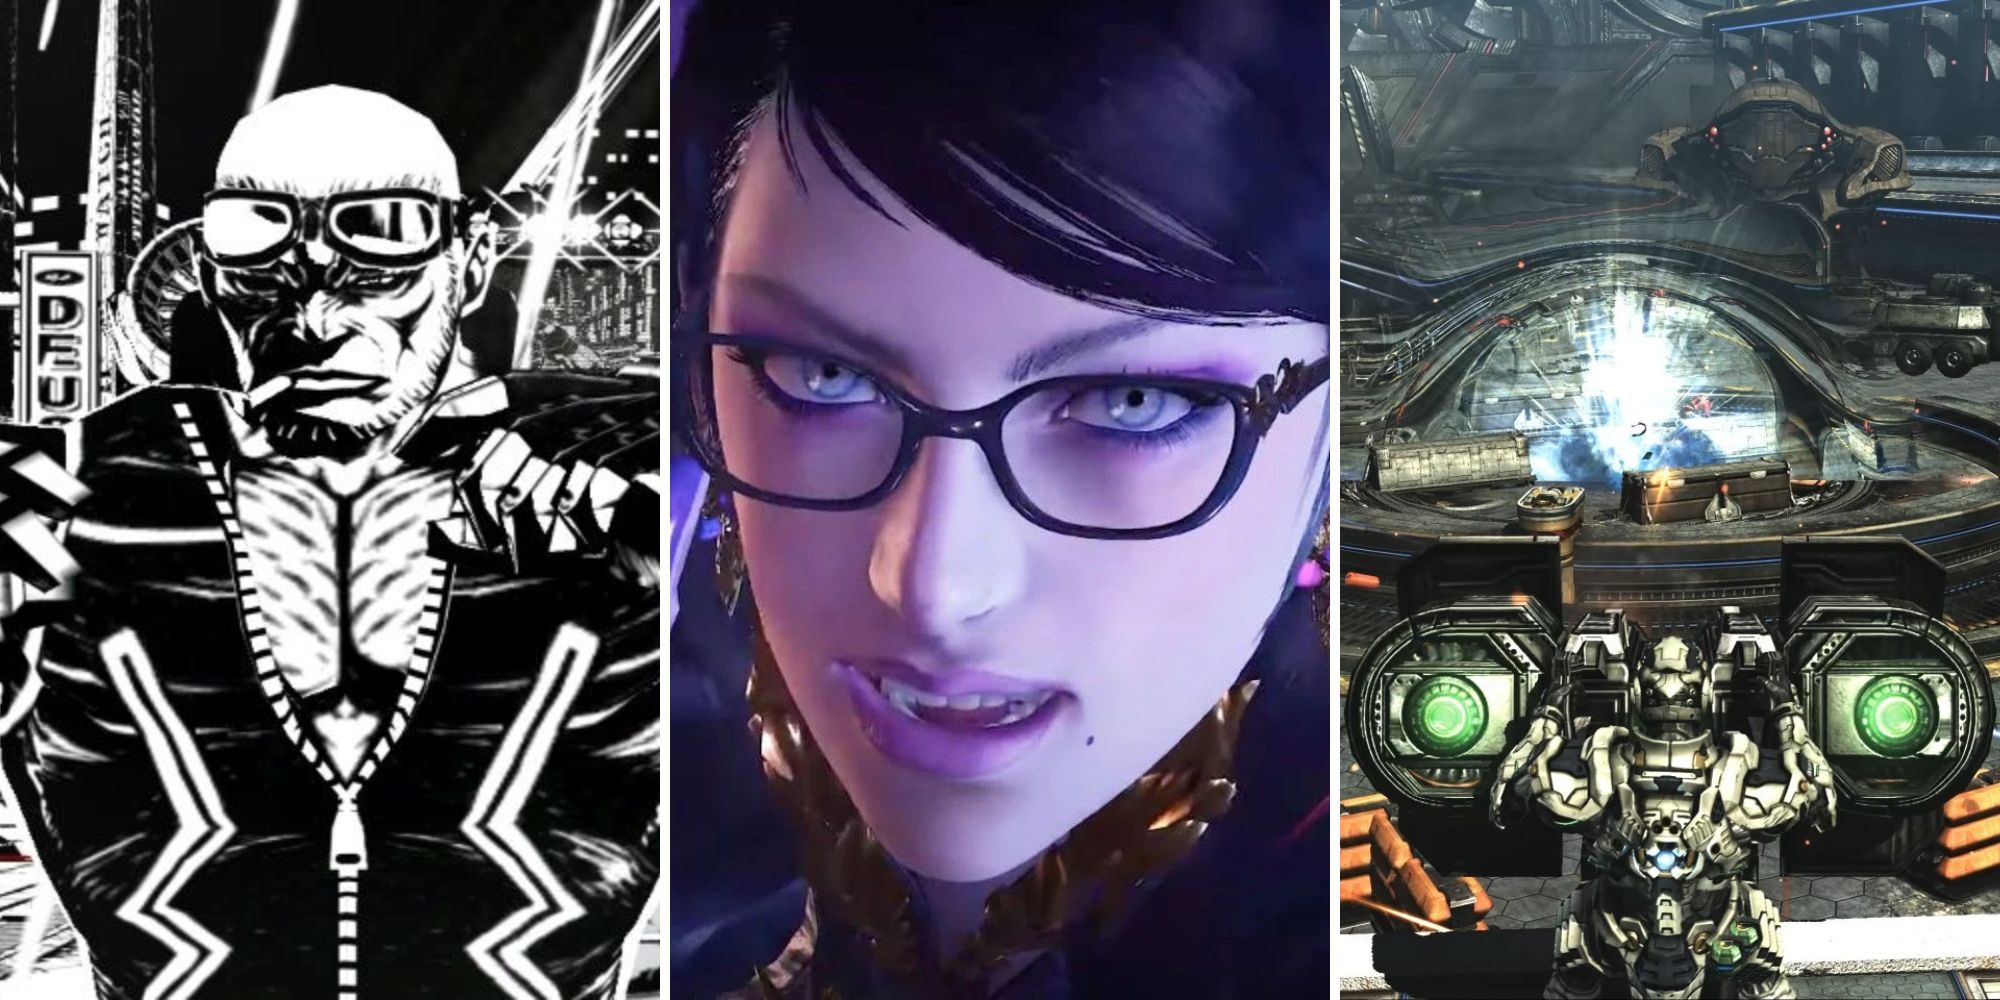 Screenshots from the games Madworld, Bayonetta 3 and Vanquish that are made by PlatinumGames